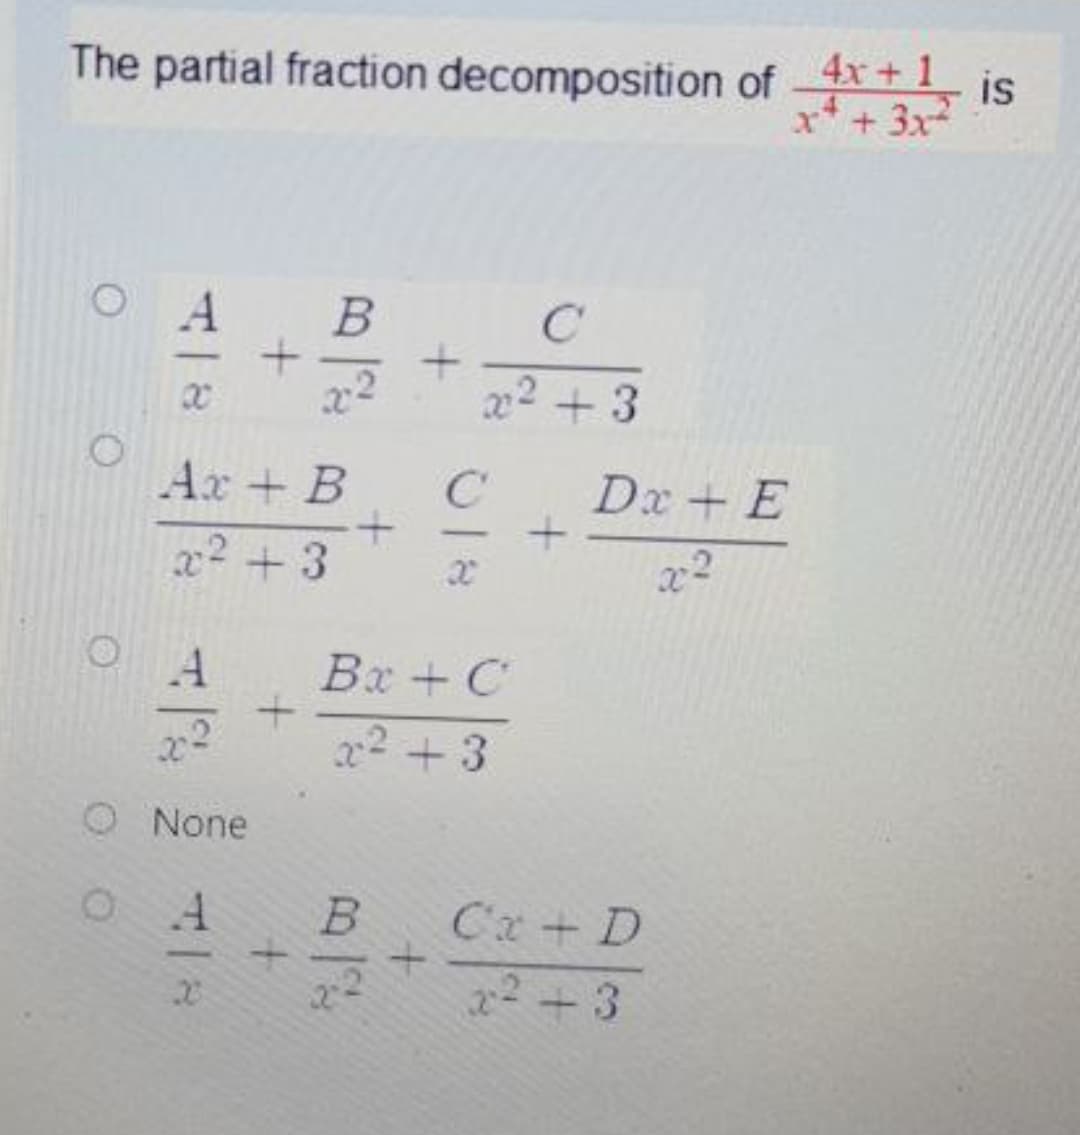 The partial fraction decomposition ofx+1
x* + 3x
is
A
x2 + 3
Ax + B
Dx + E
x2 +3
x2
Bx + C
x2 + 3
O None
Cx+ D
22+3
